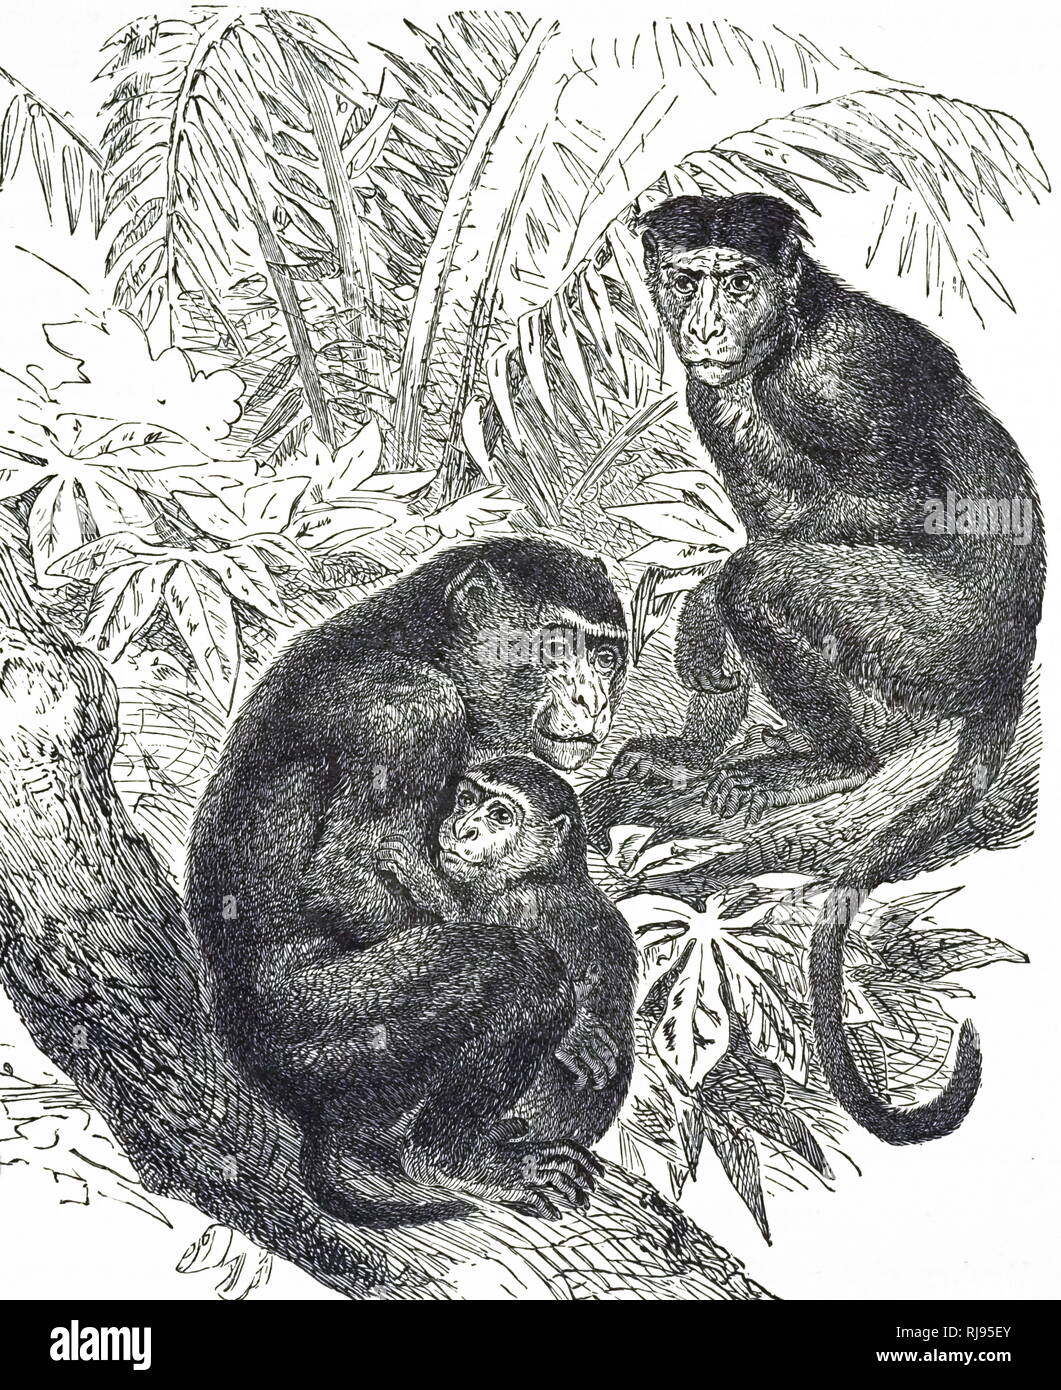 An engraving depicting a rhesus macaque, one of the best-known species of Old World monkeys. Dated 20th century Stock Photo